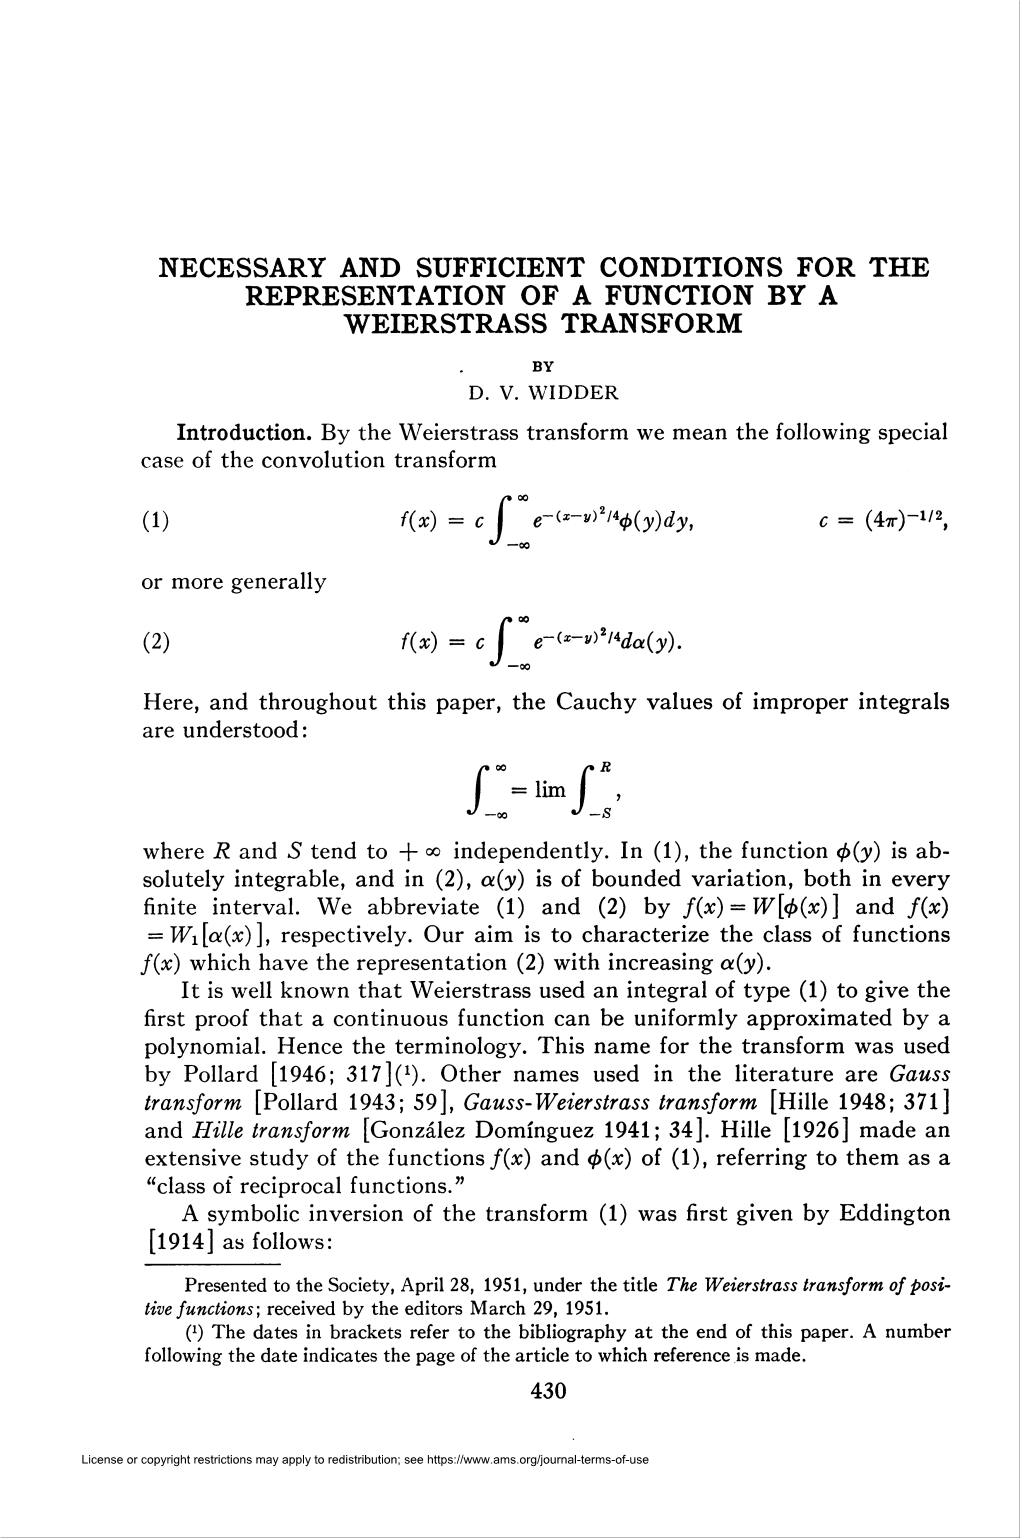 Necessary and Sufficient Conditions for the Representation of a Function by a Weierstrass Transform